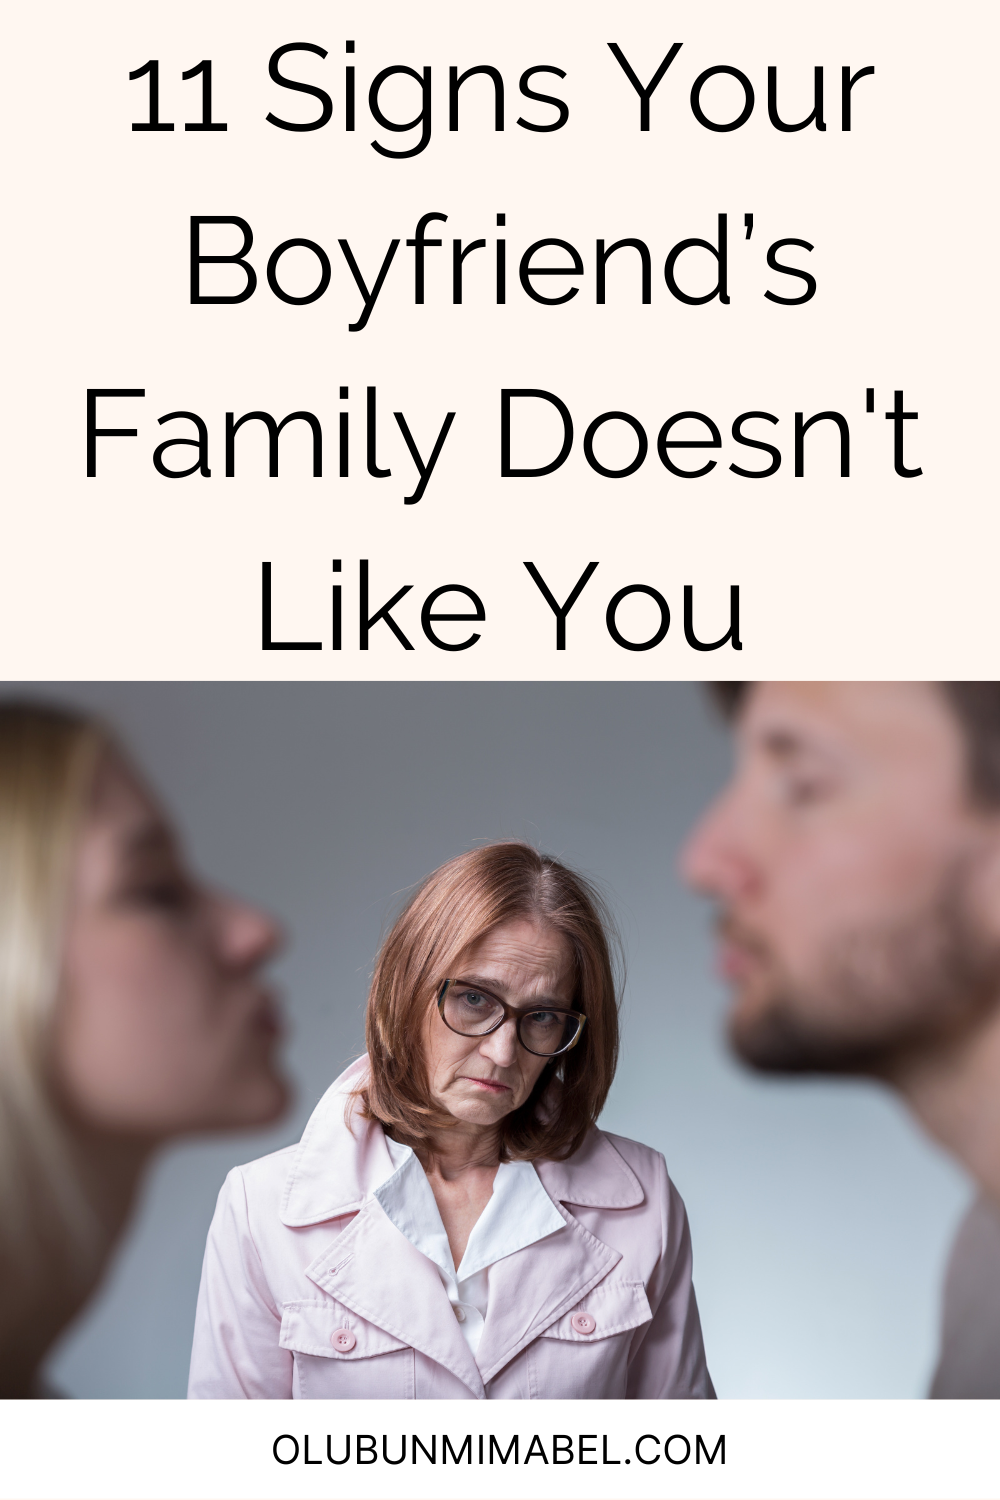 Signs Your Boyfriend's Family Doesn't Like You